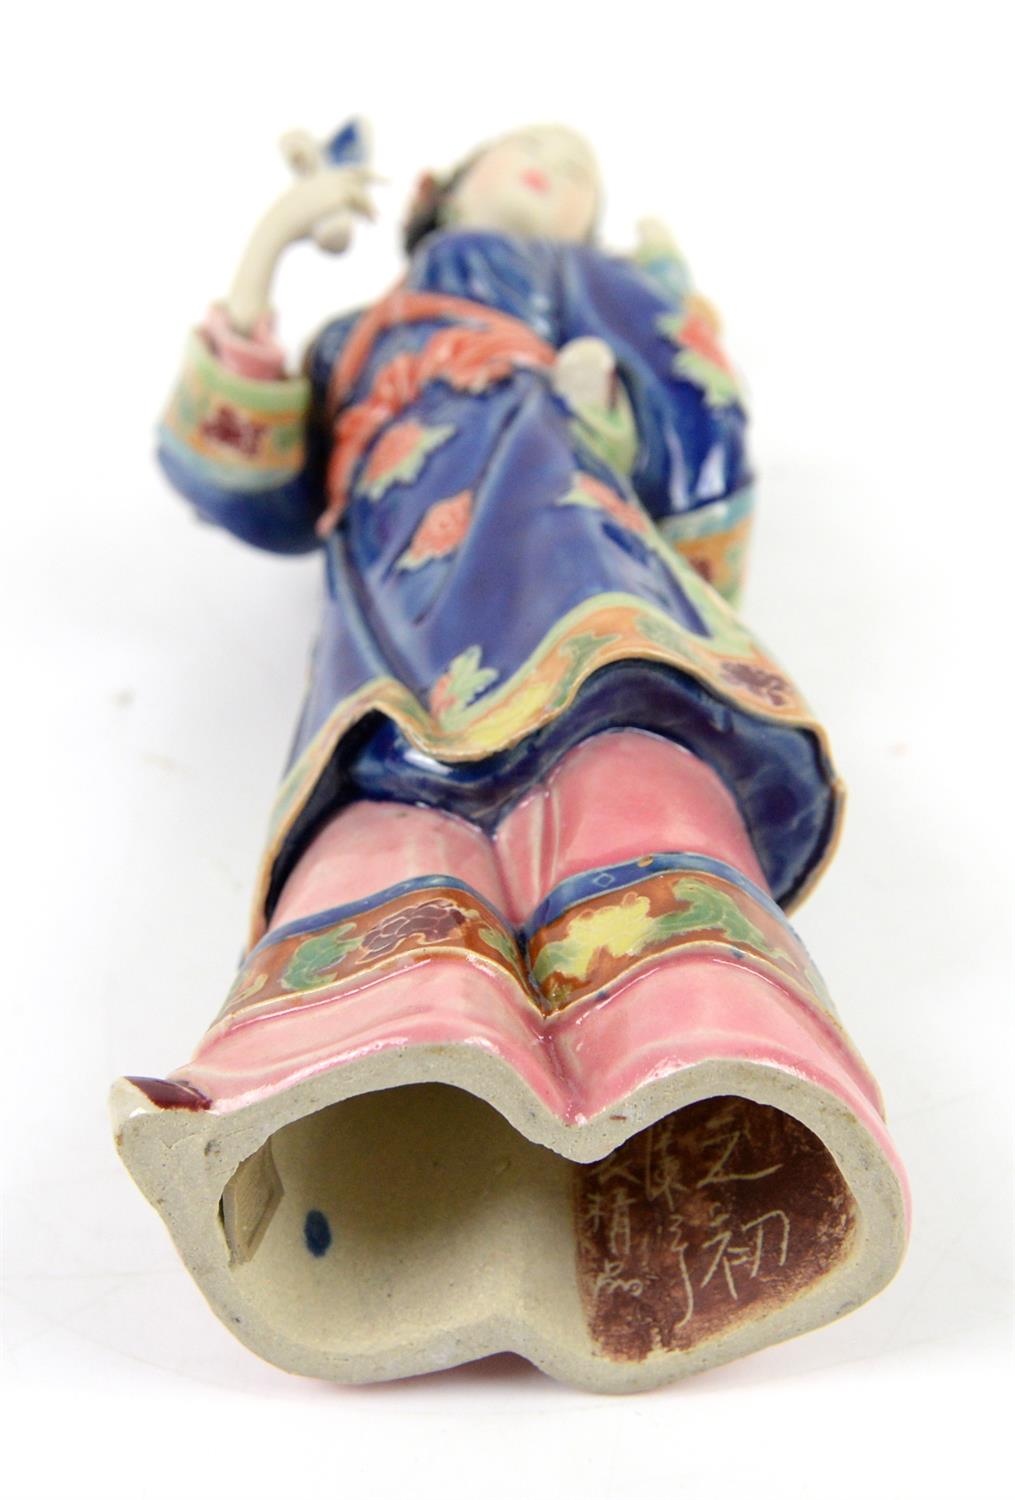 Polychrome ceramic Manchu/Chinese girl and child, signed to interior - Image 5 of 14